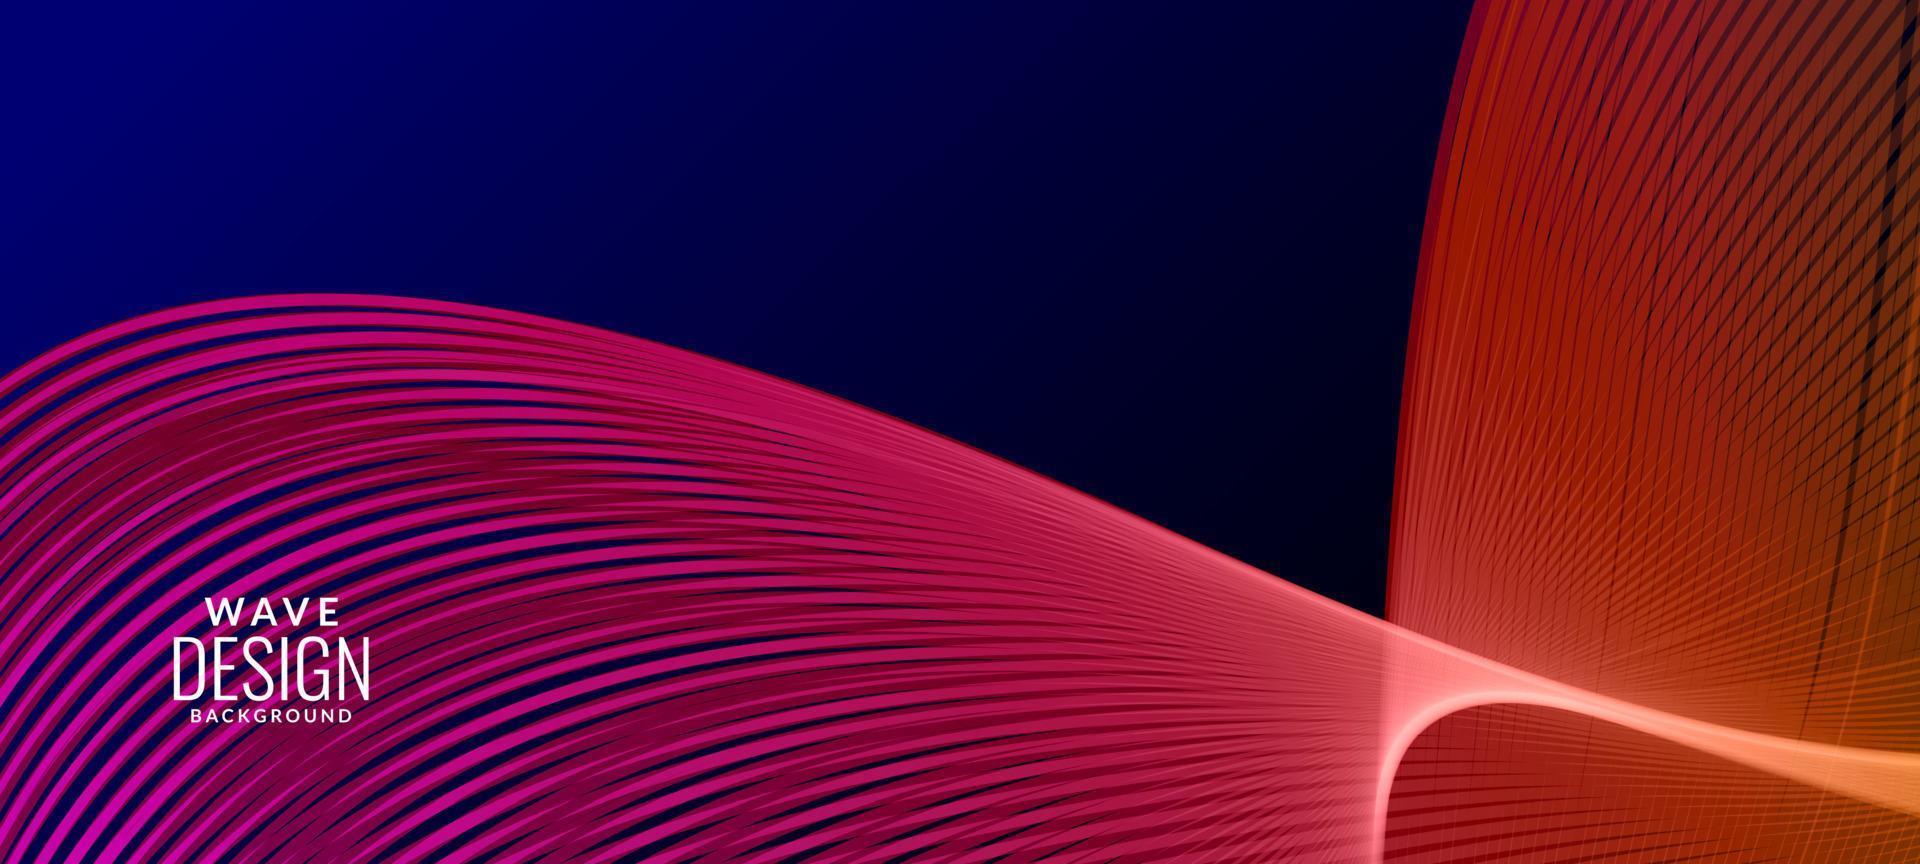 Abstract background modern red elegant colorful banner background vector